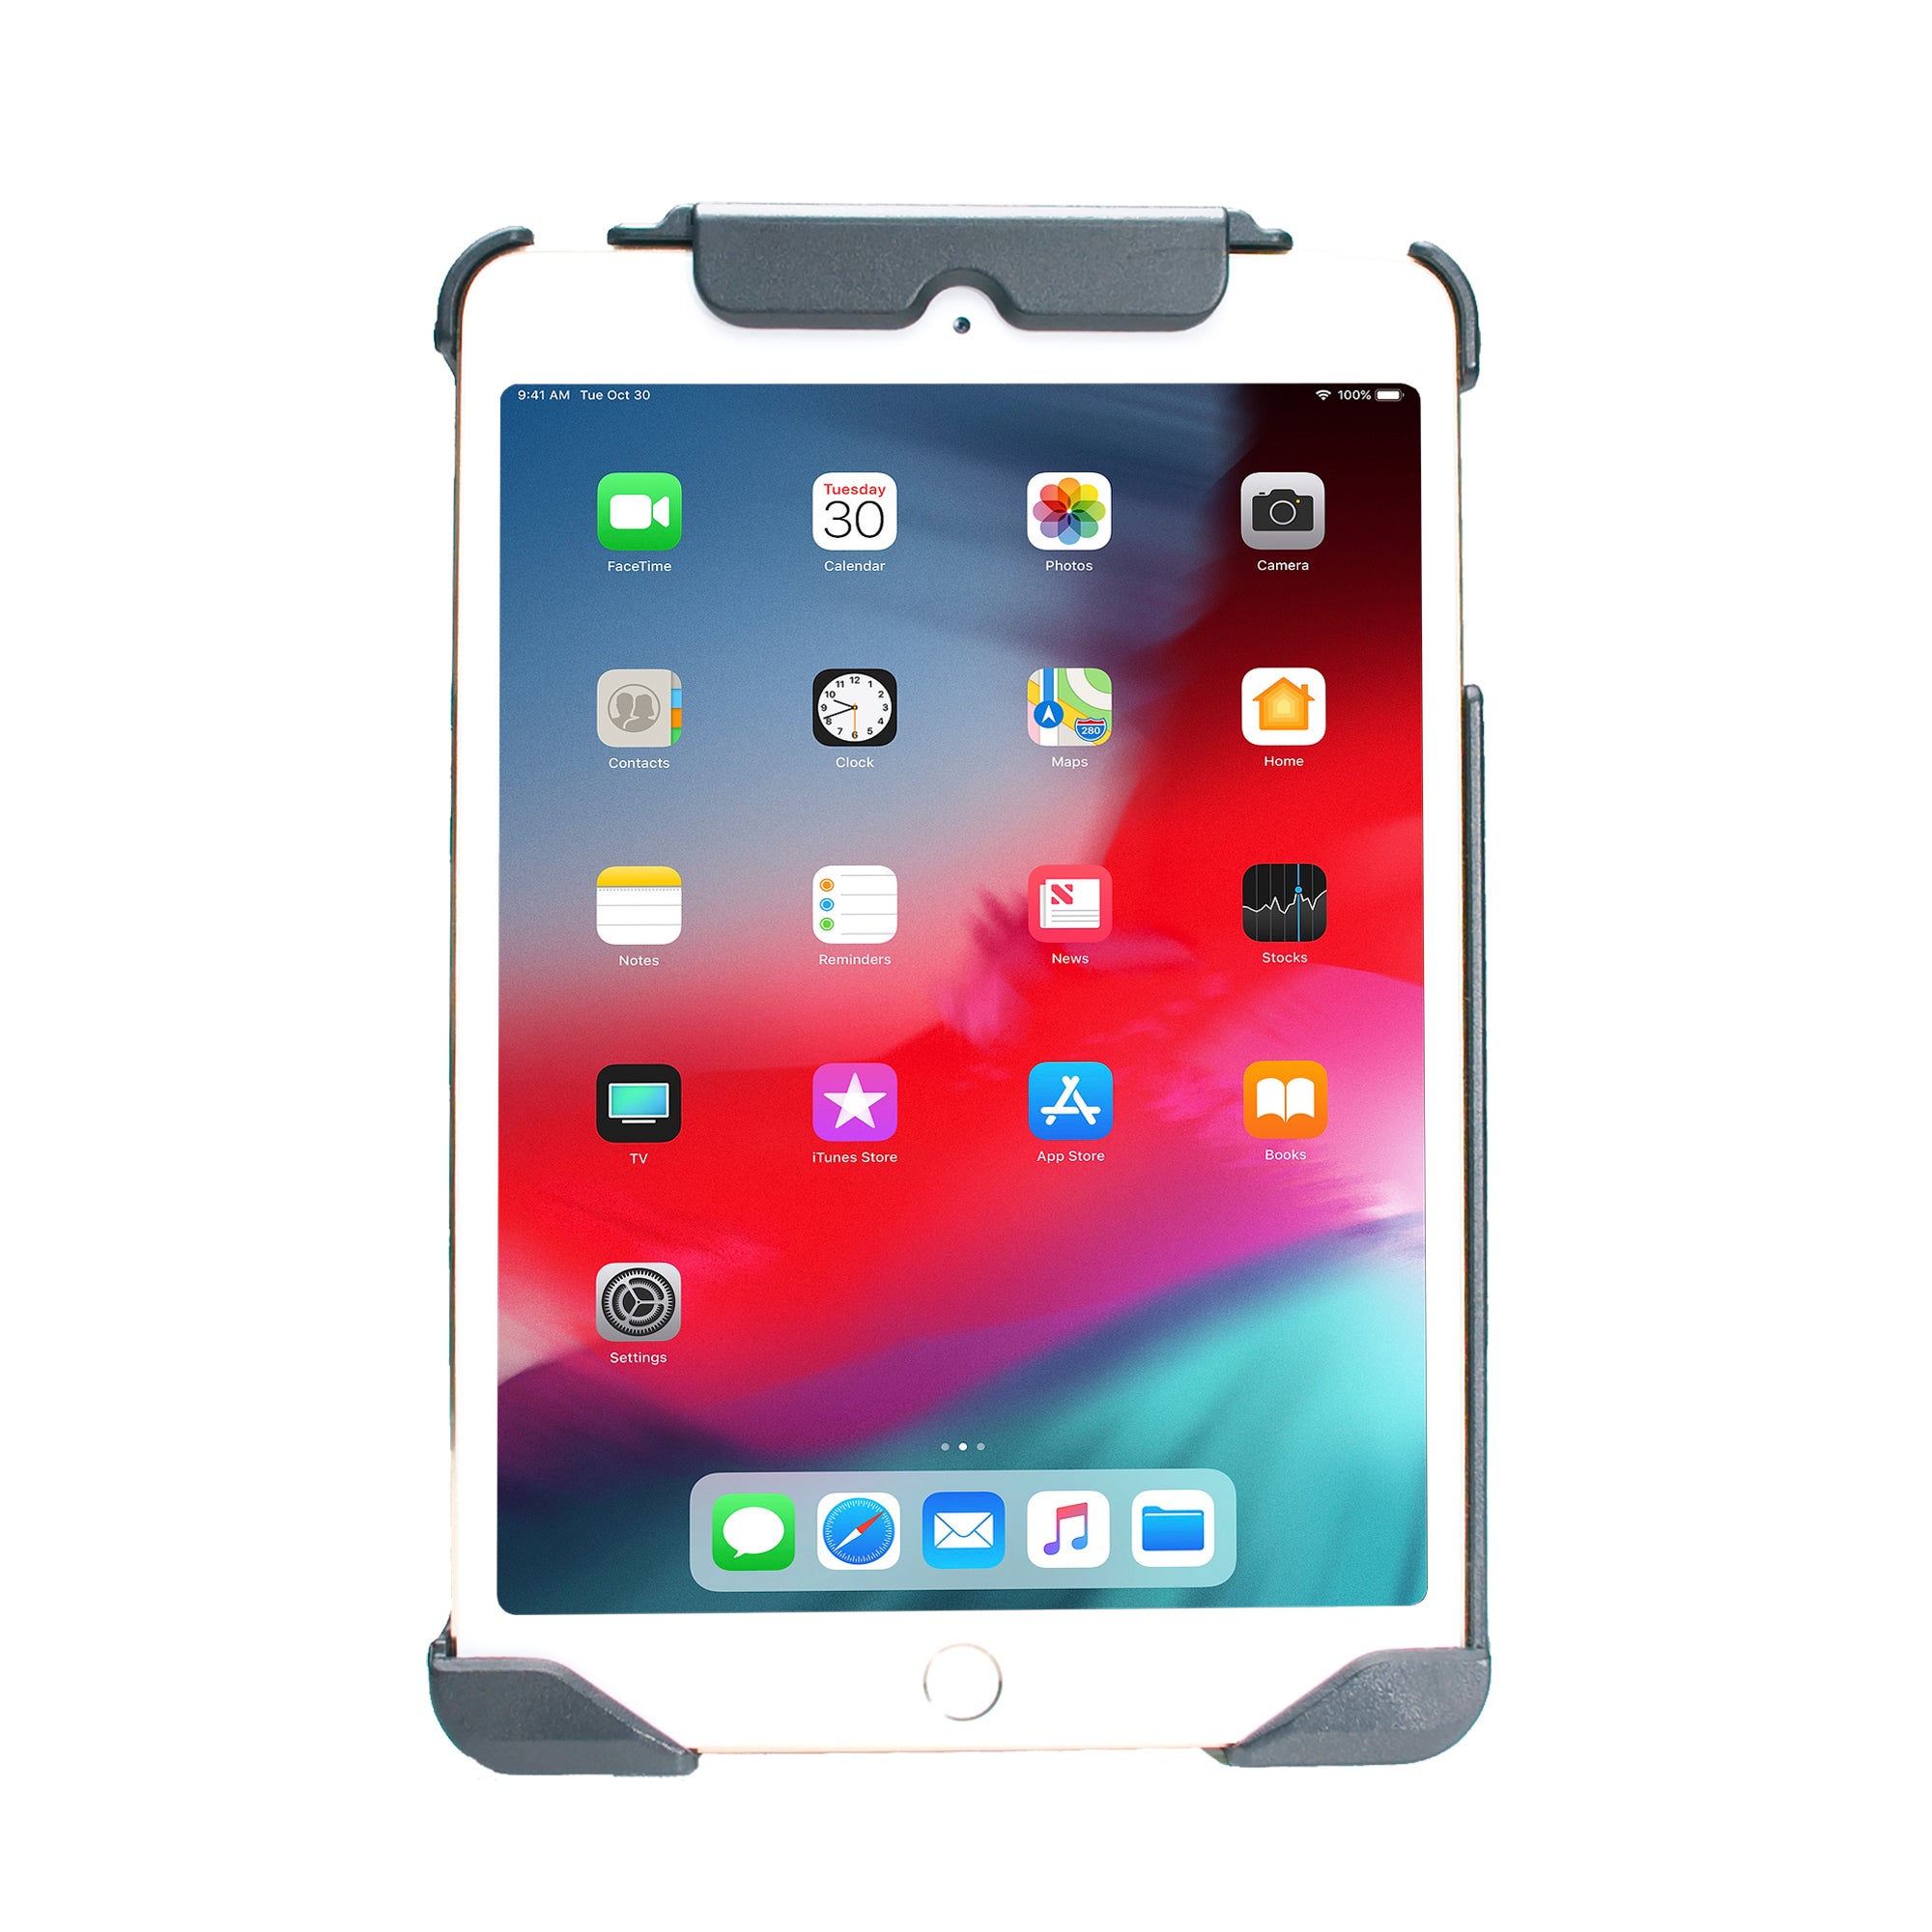 Anti-Theft Case with Built-in Grip Stand for iPad mini (Gen. 1-5)